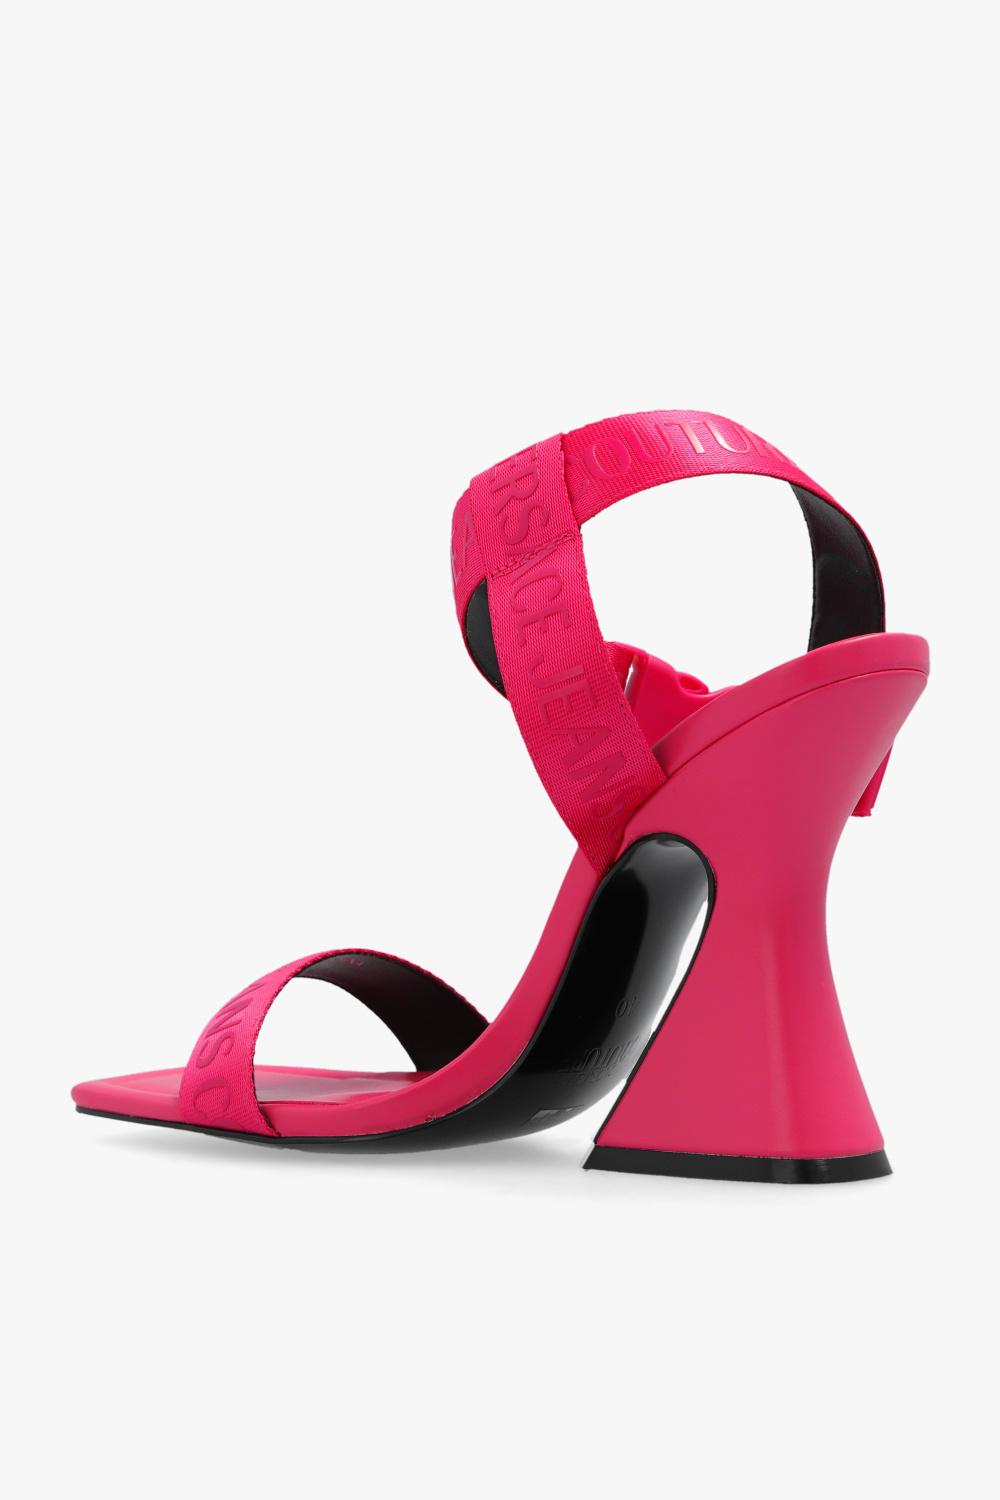 youre counting on running with people ‘Kirsten’ heeled sandals